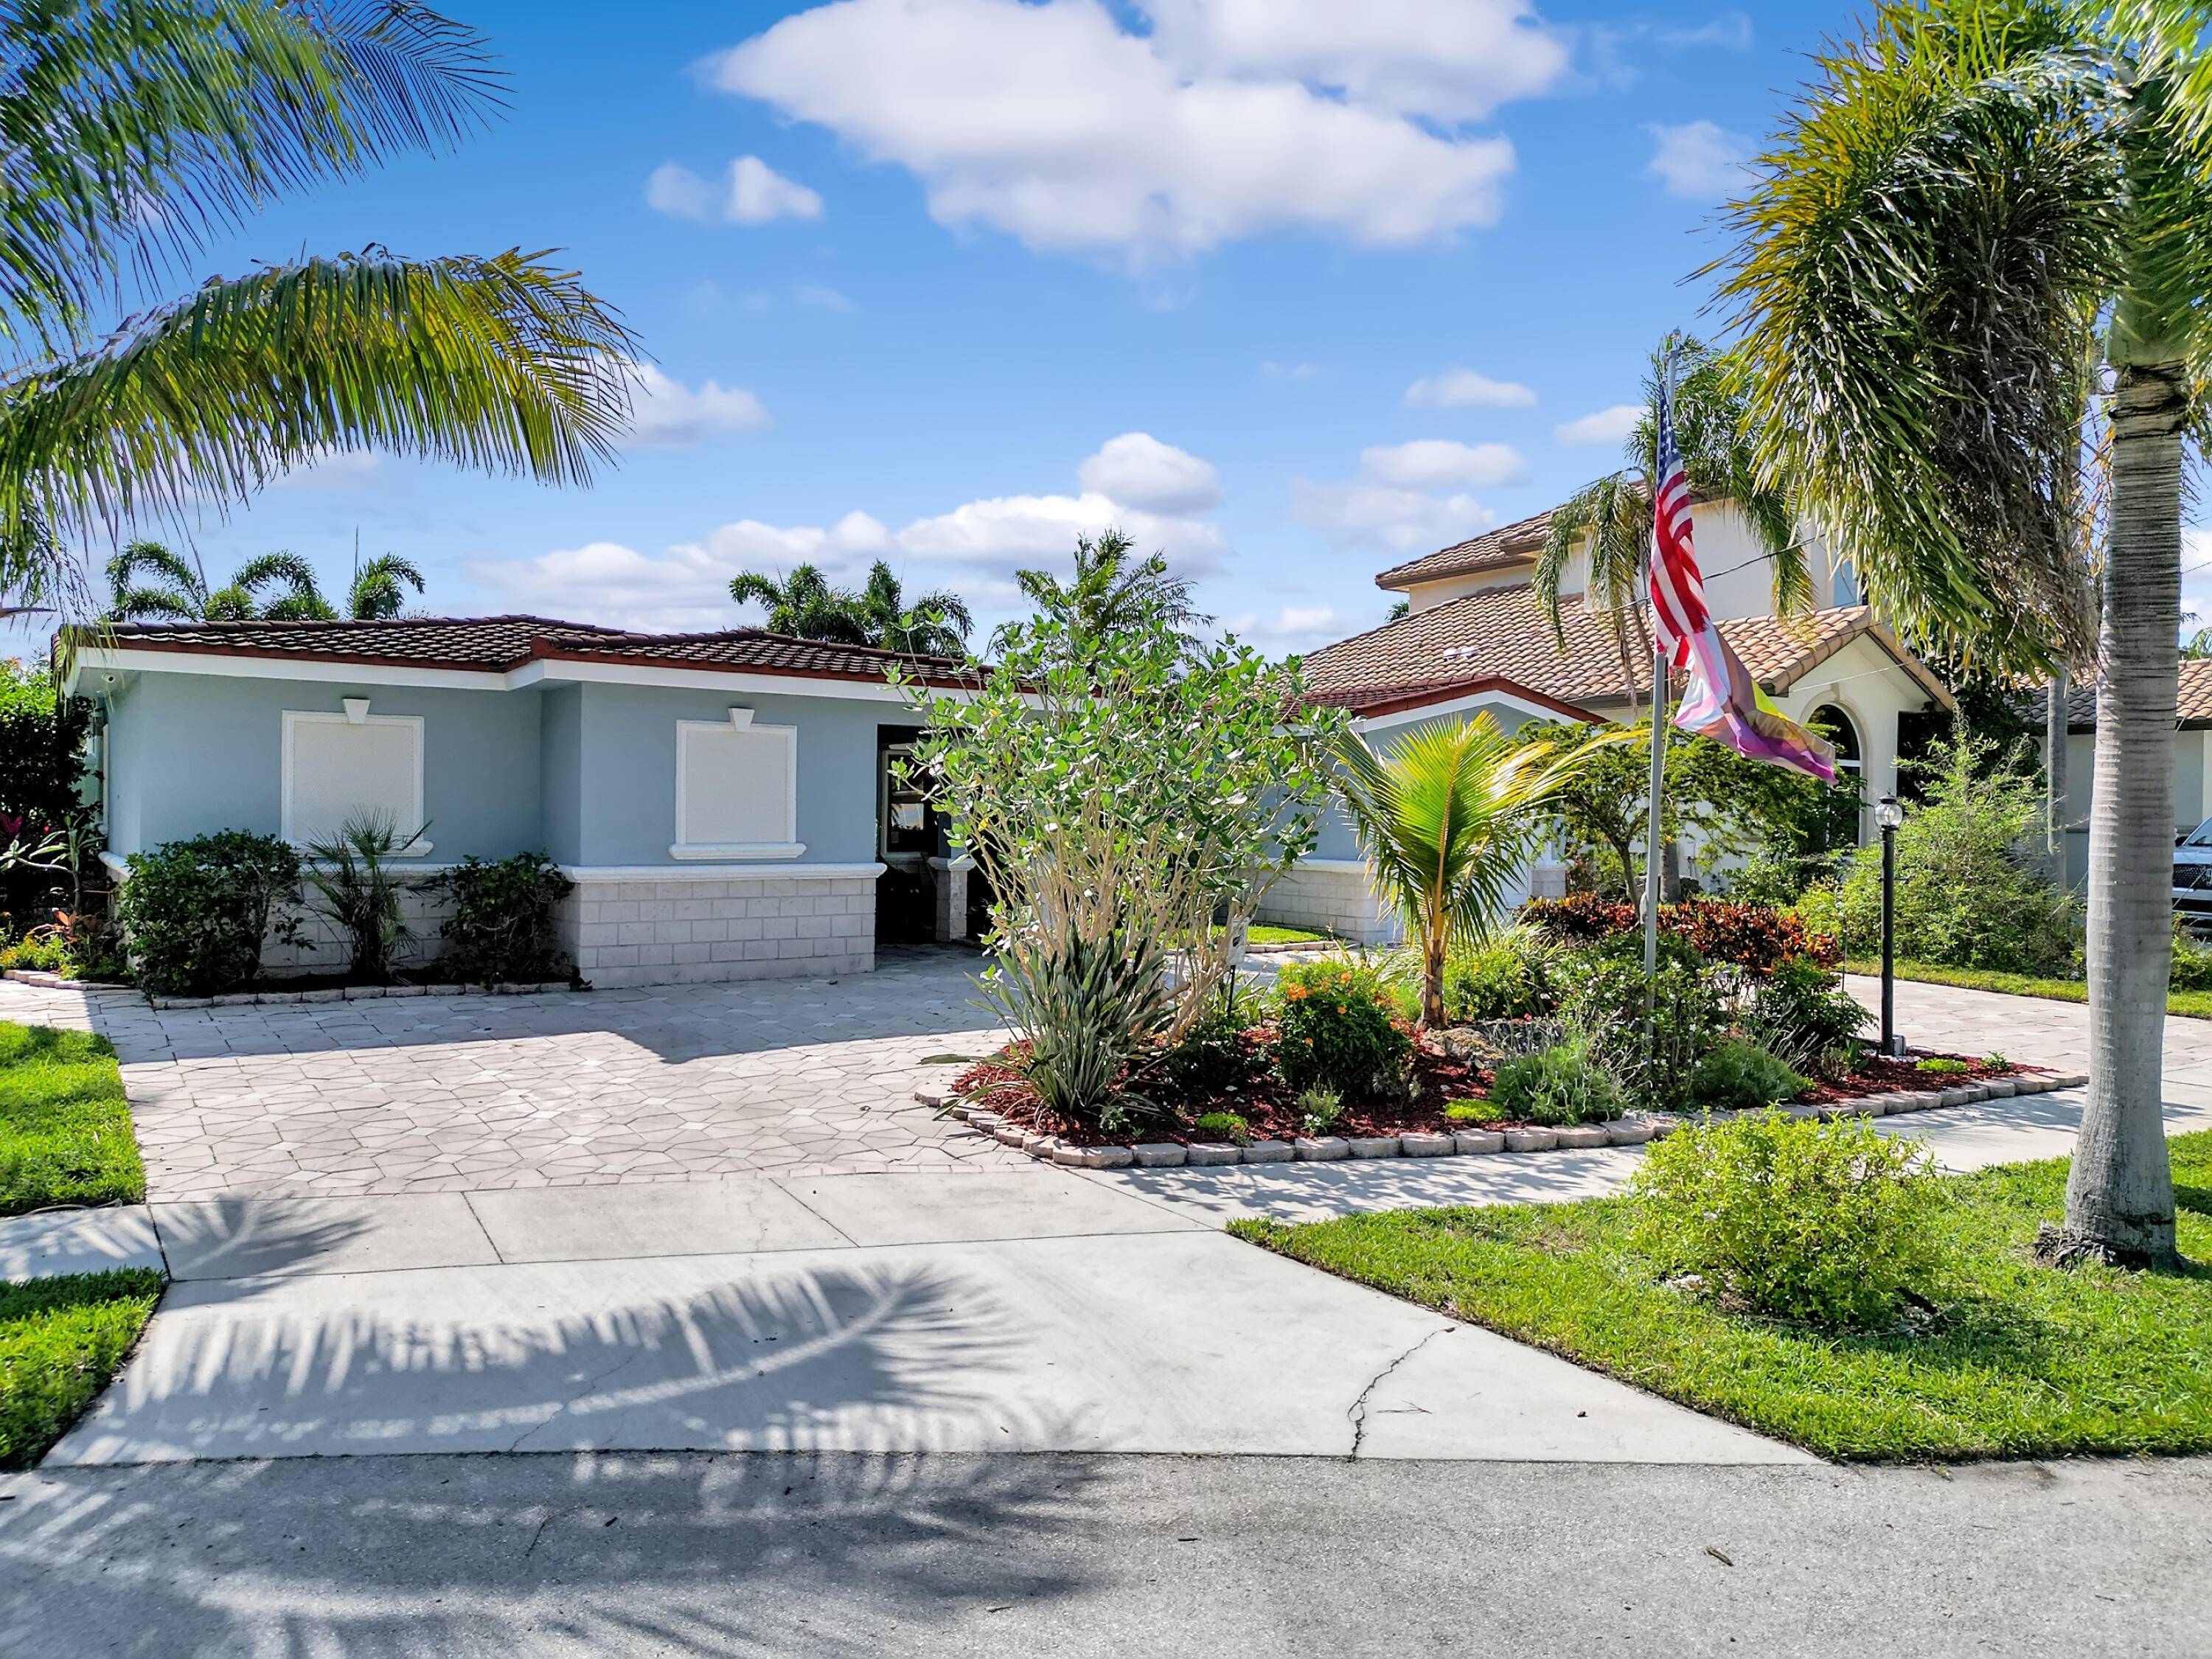 Introducing a magnificent waterfront retreat nestled in the exclusive boaters' dream location of Deerfield Beach's prestigious Cove neighborhood.